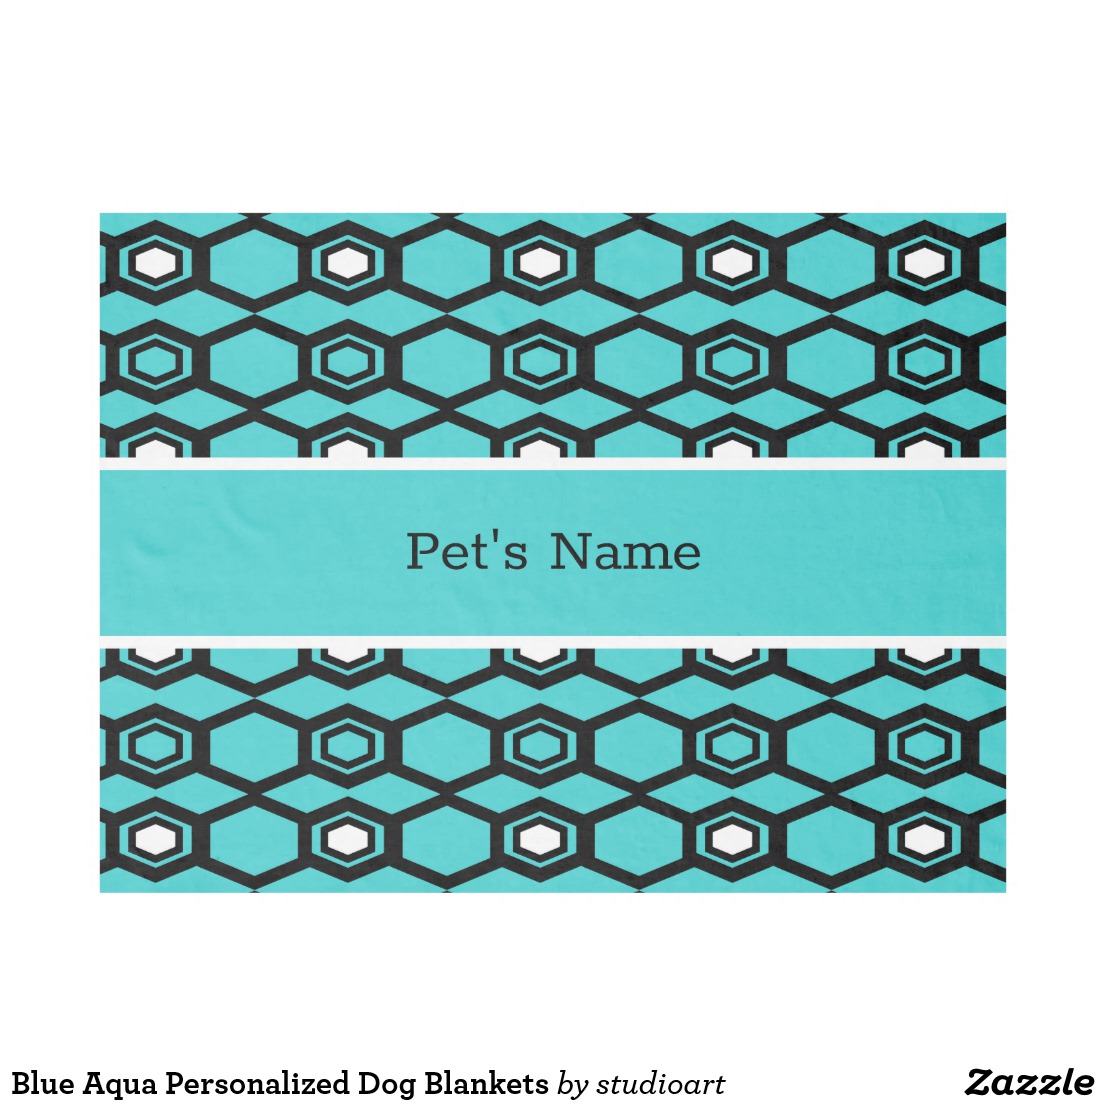 Personalized dog blankets